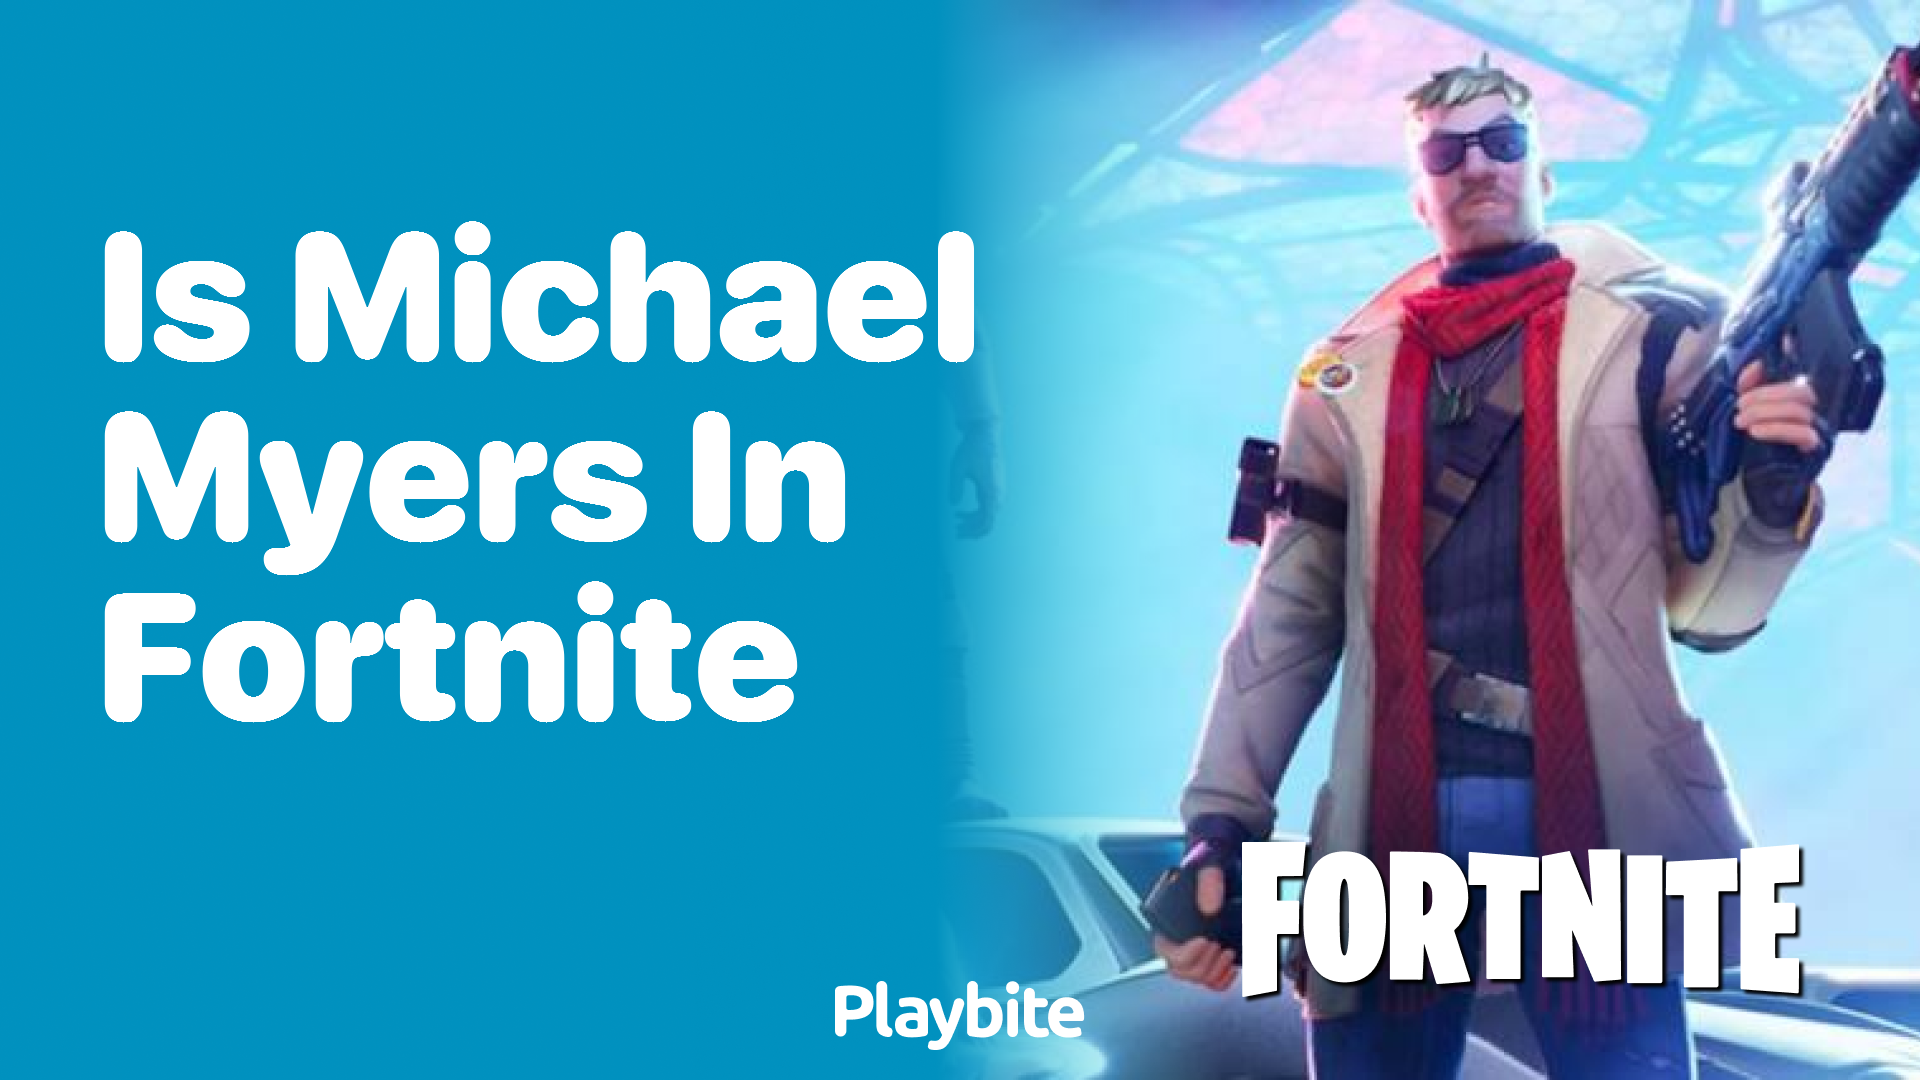 Is Michael Myers in Fortnite?